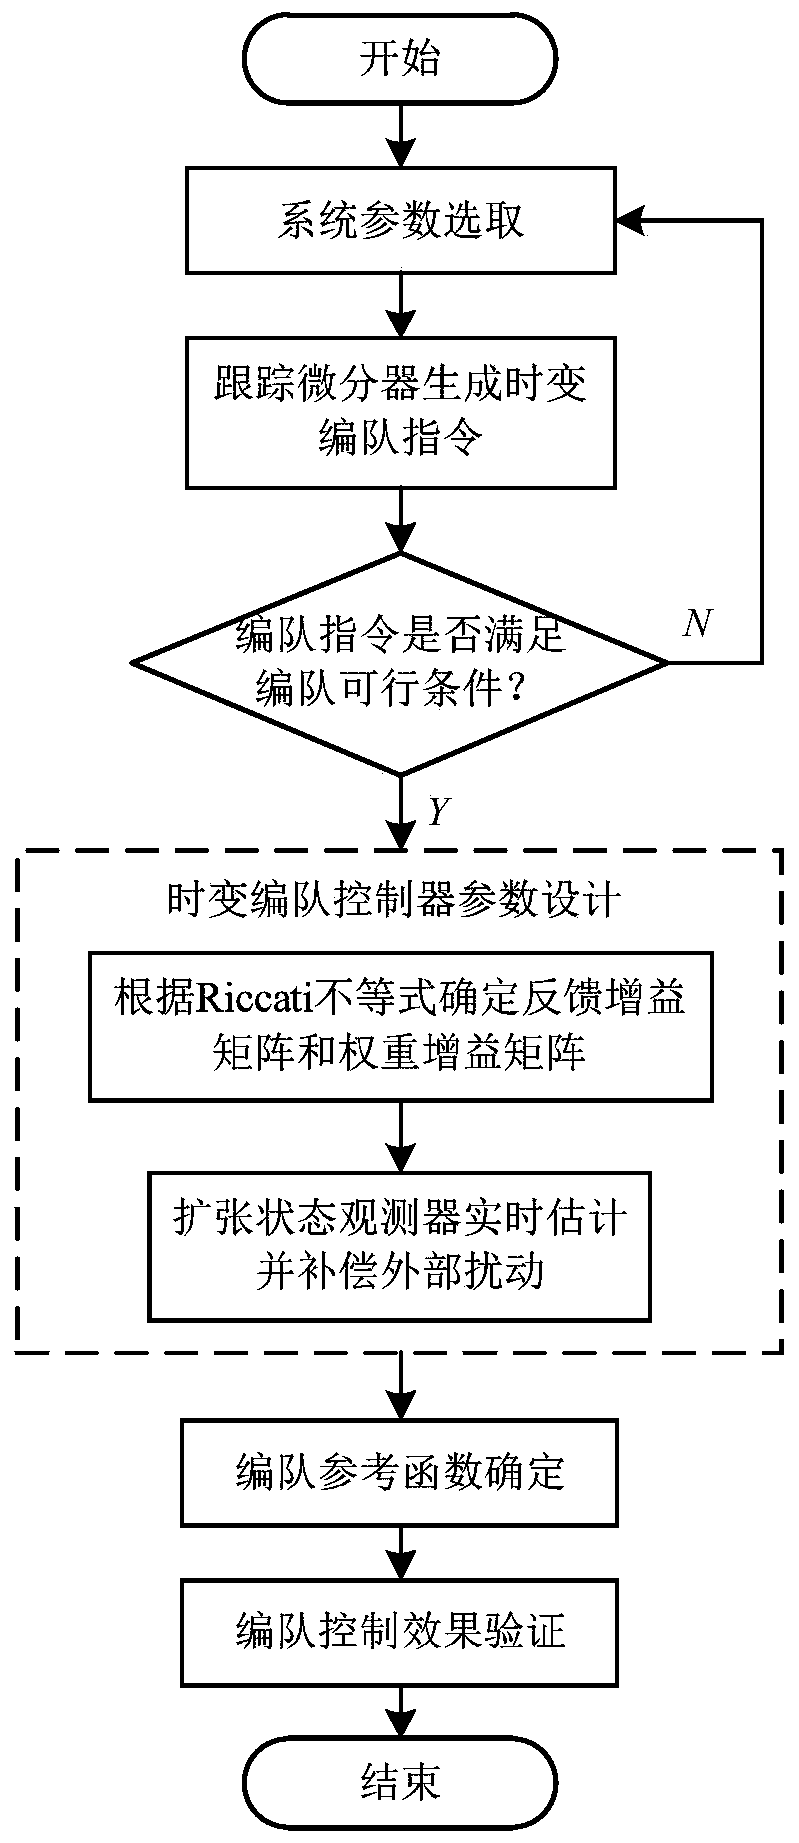 Multi-agent fully-distributed active disturbance rejection time-varying formation control method